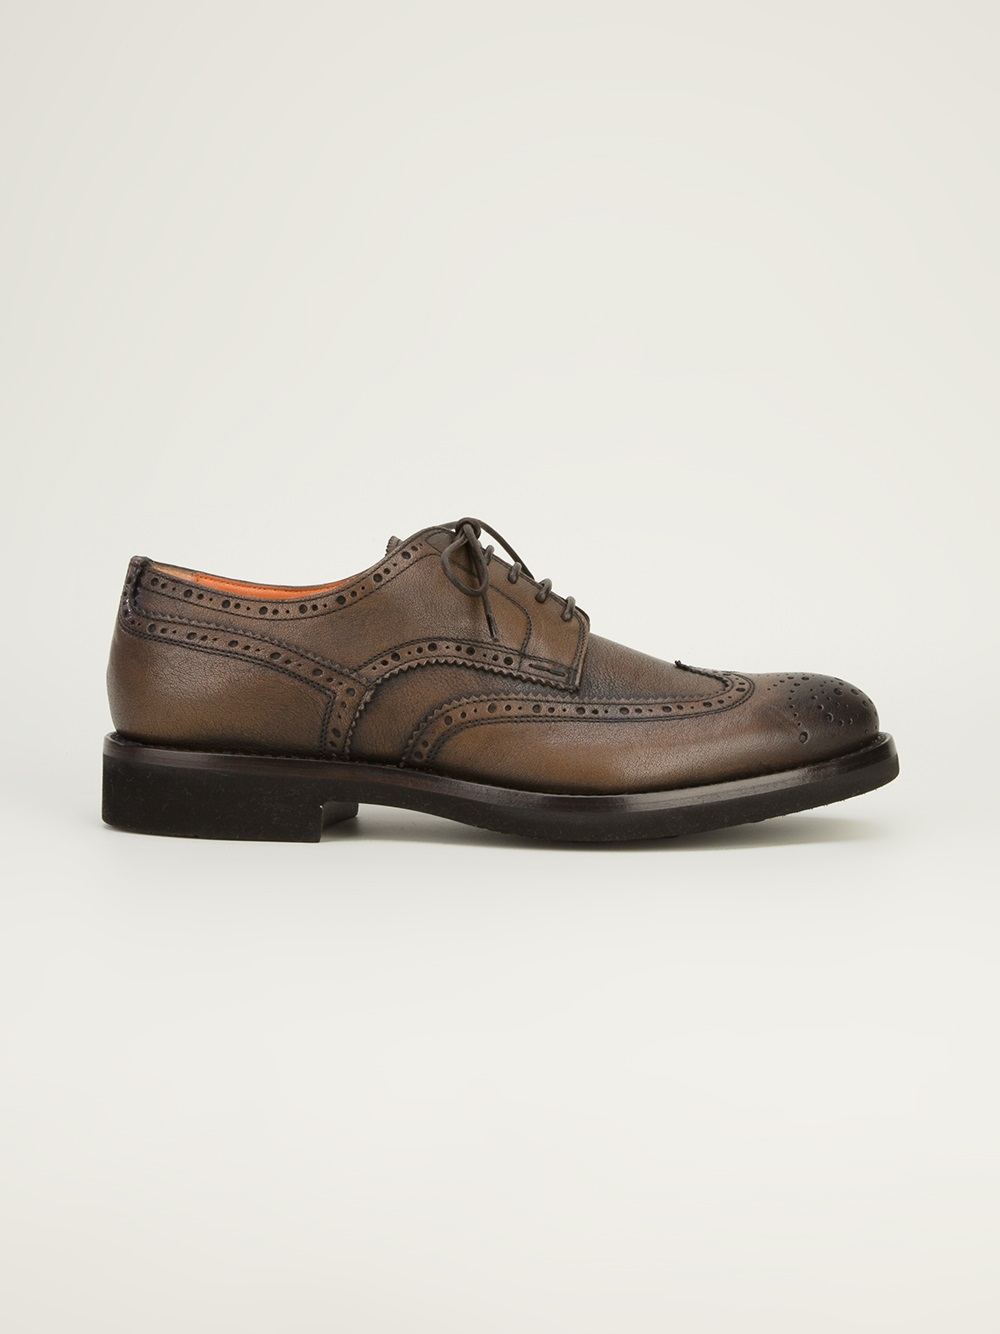 Lyst - Santoni Lace Up Brogue in Brown for Men